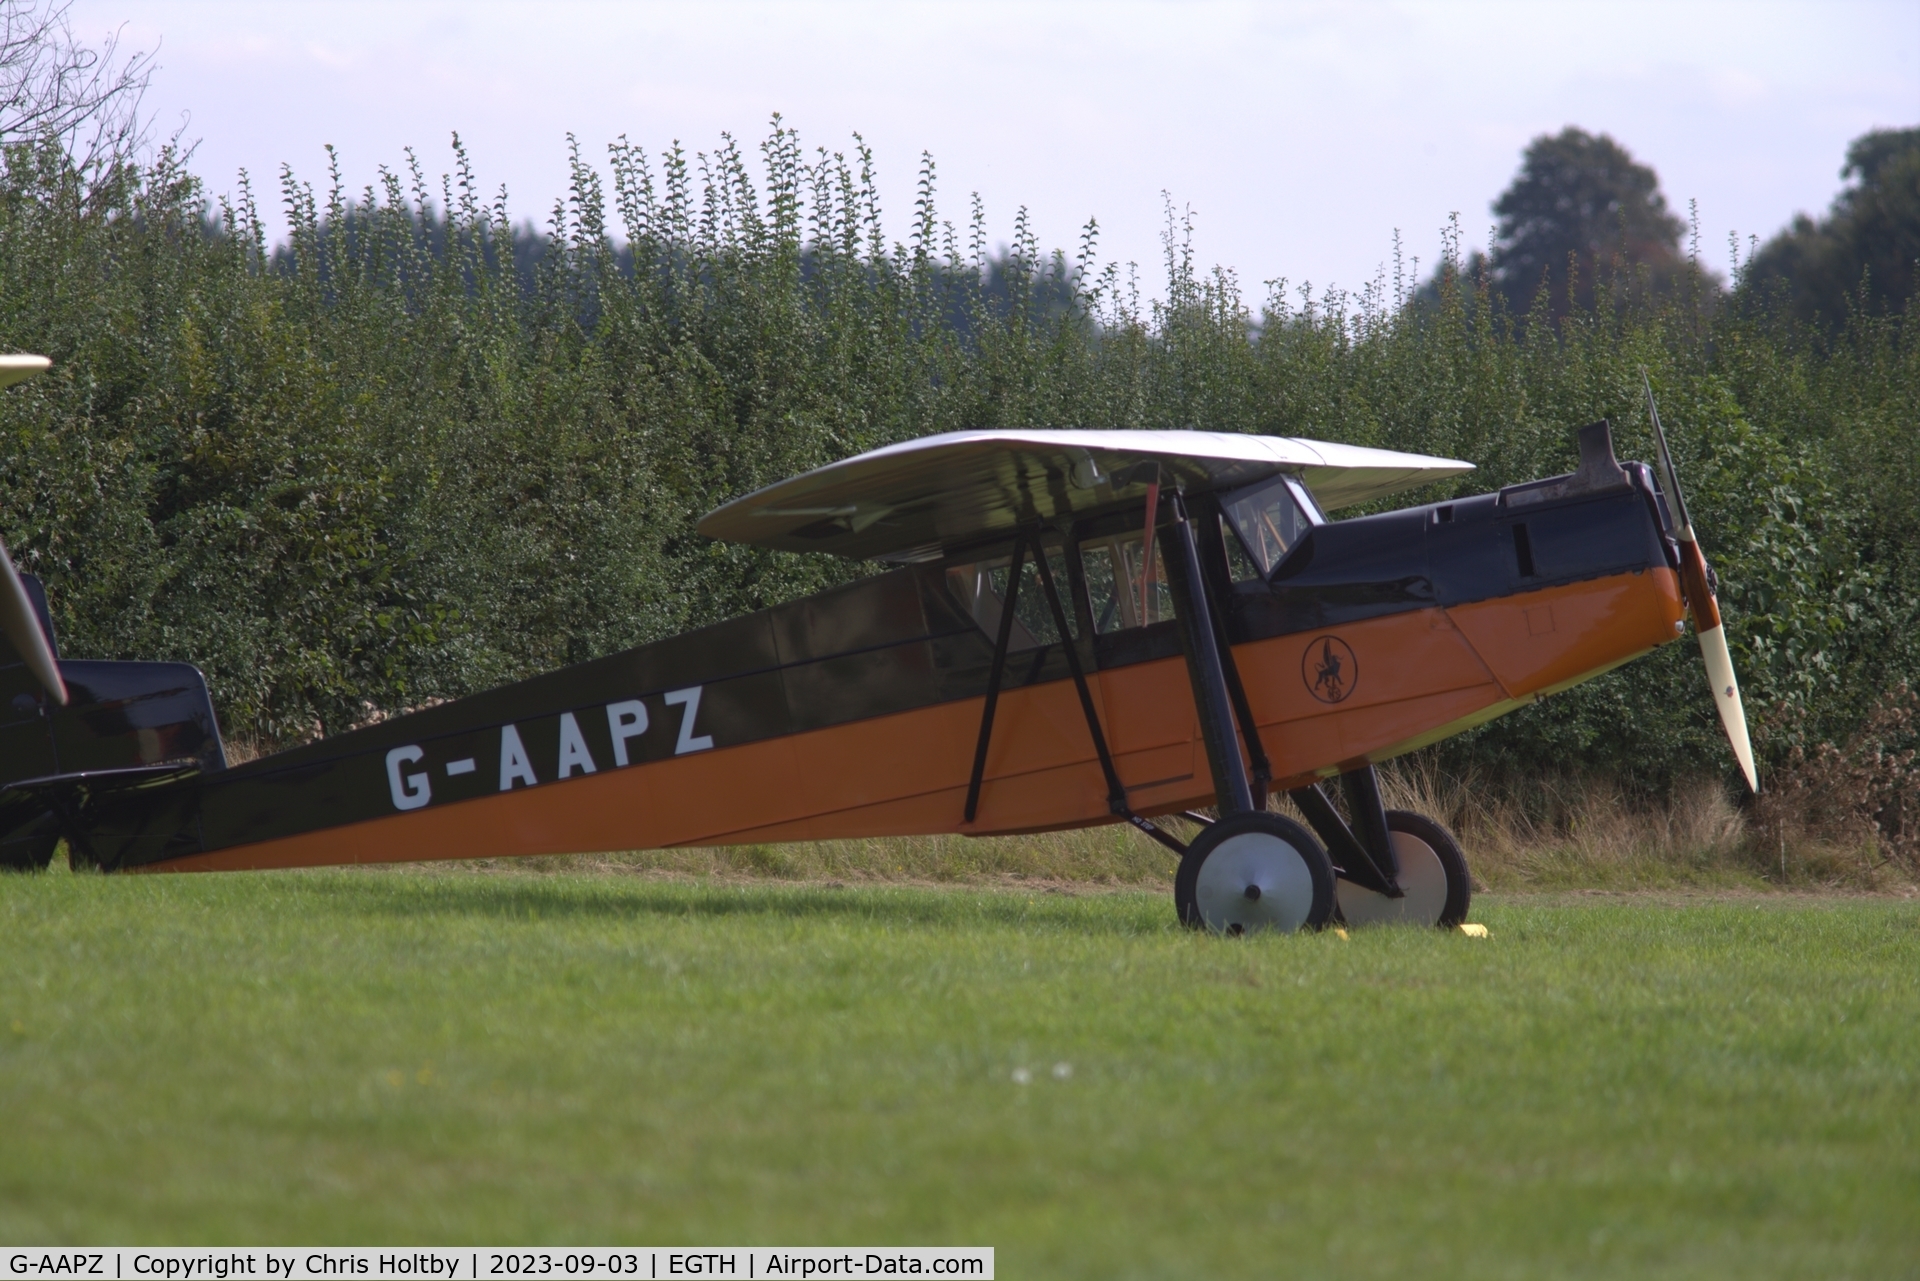 G-AAPZ, 1930 Desoutter MKI C/N D.25, At the Vintage Airshow at Old Warden, Beds.